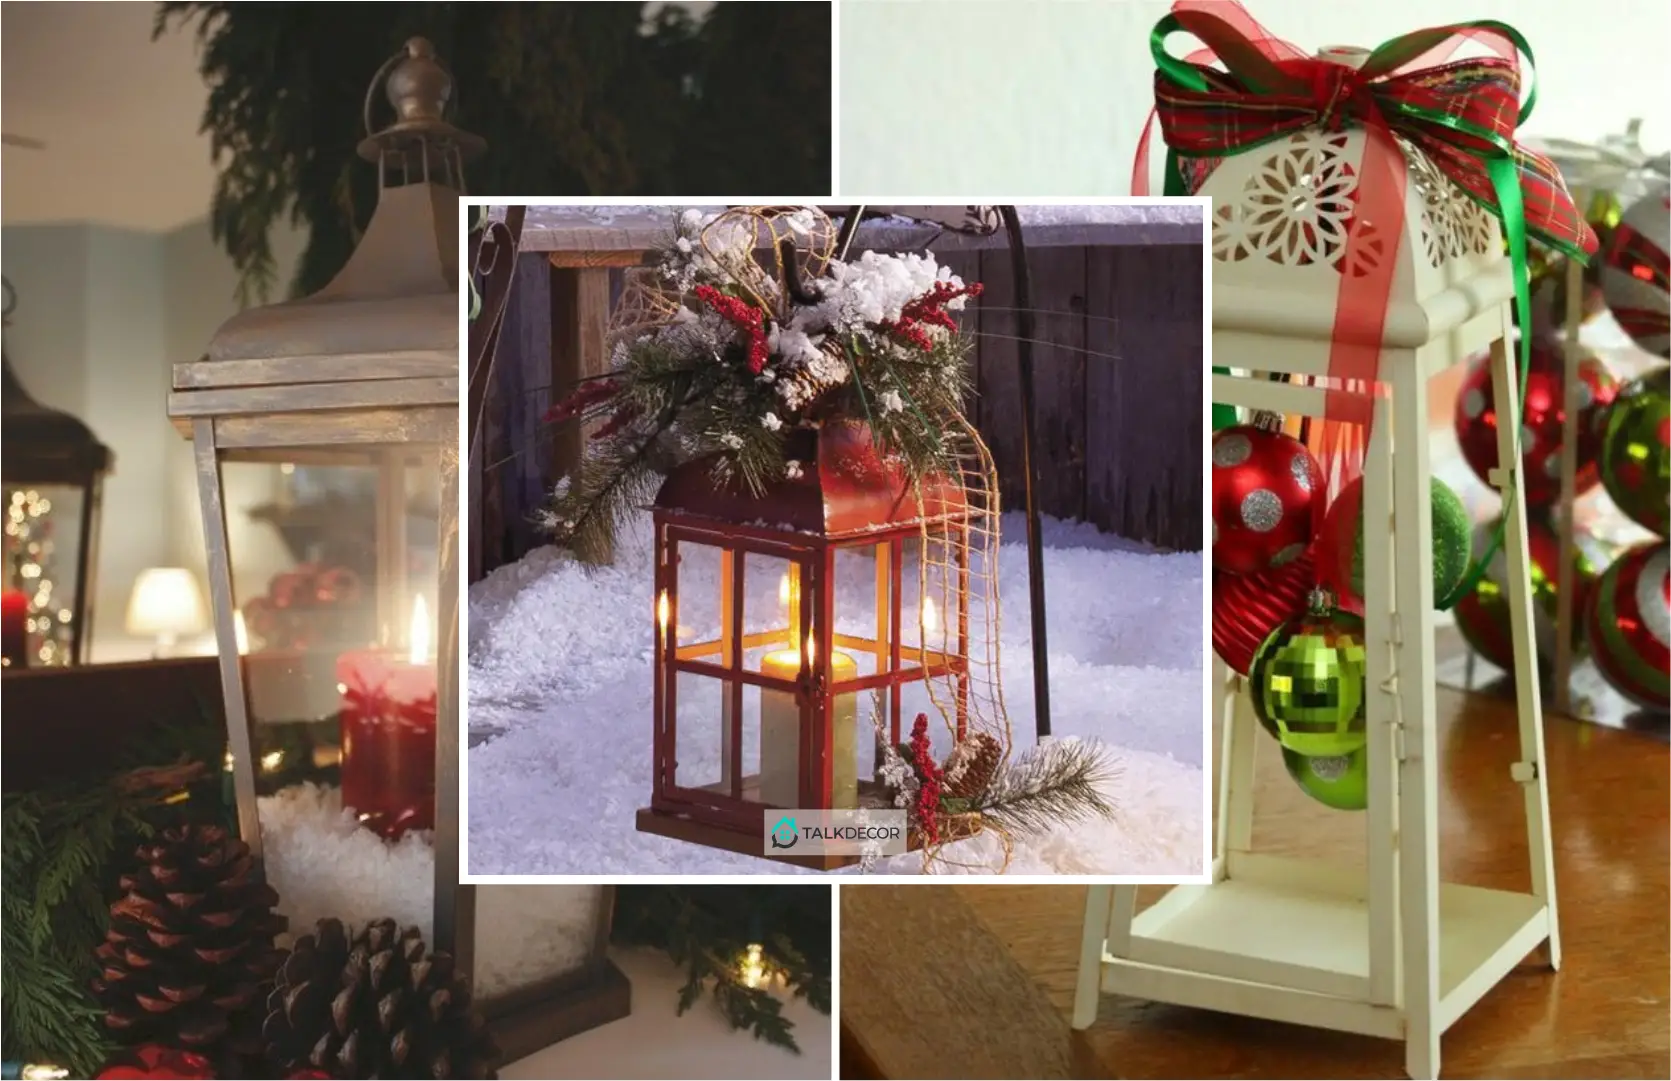 How the Lantern Can be a Good Addition to Your Winter Decoration